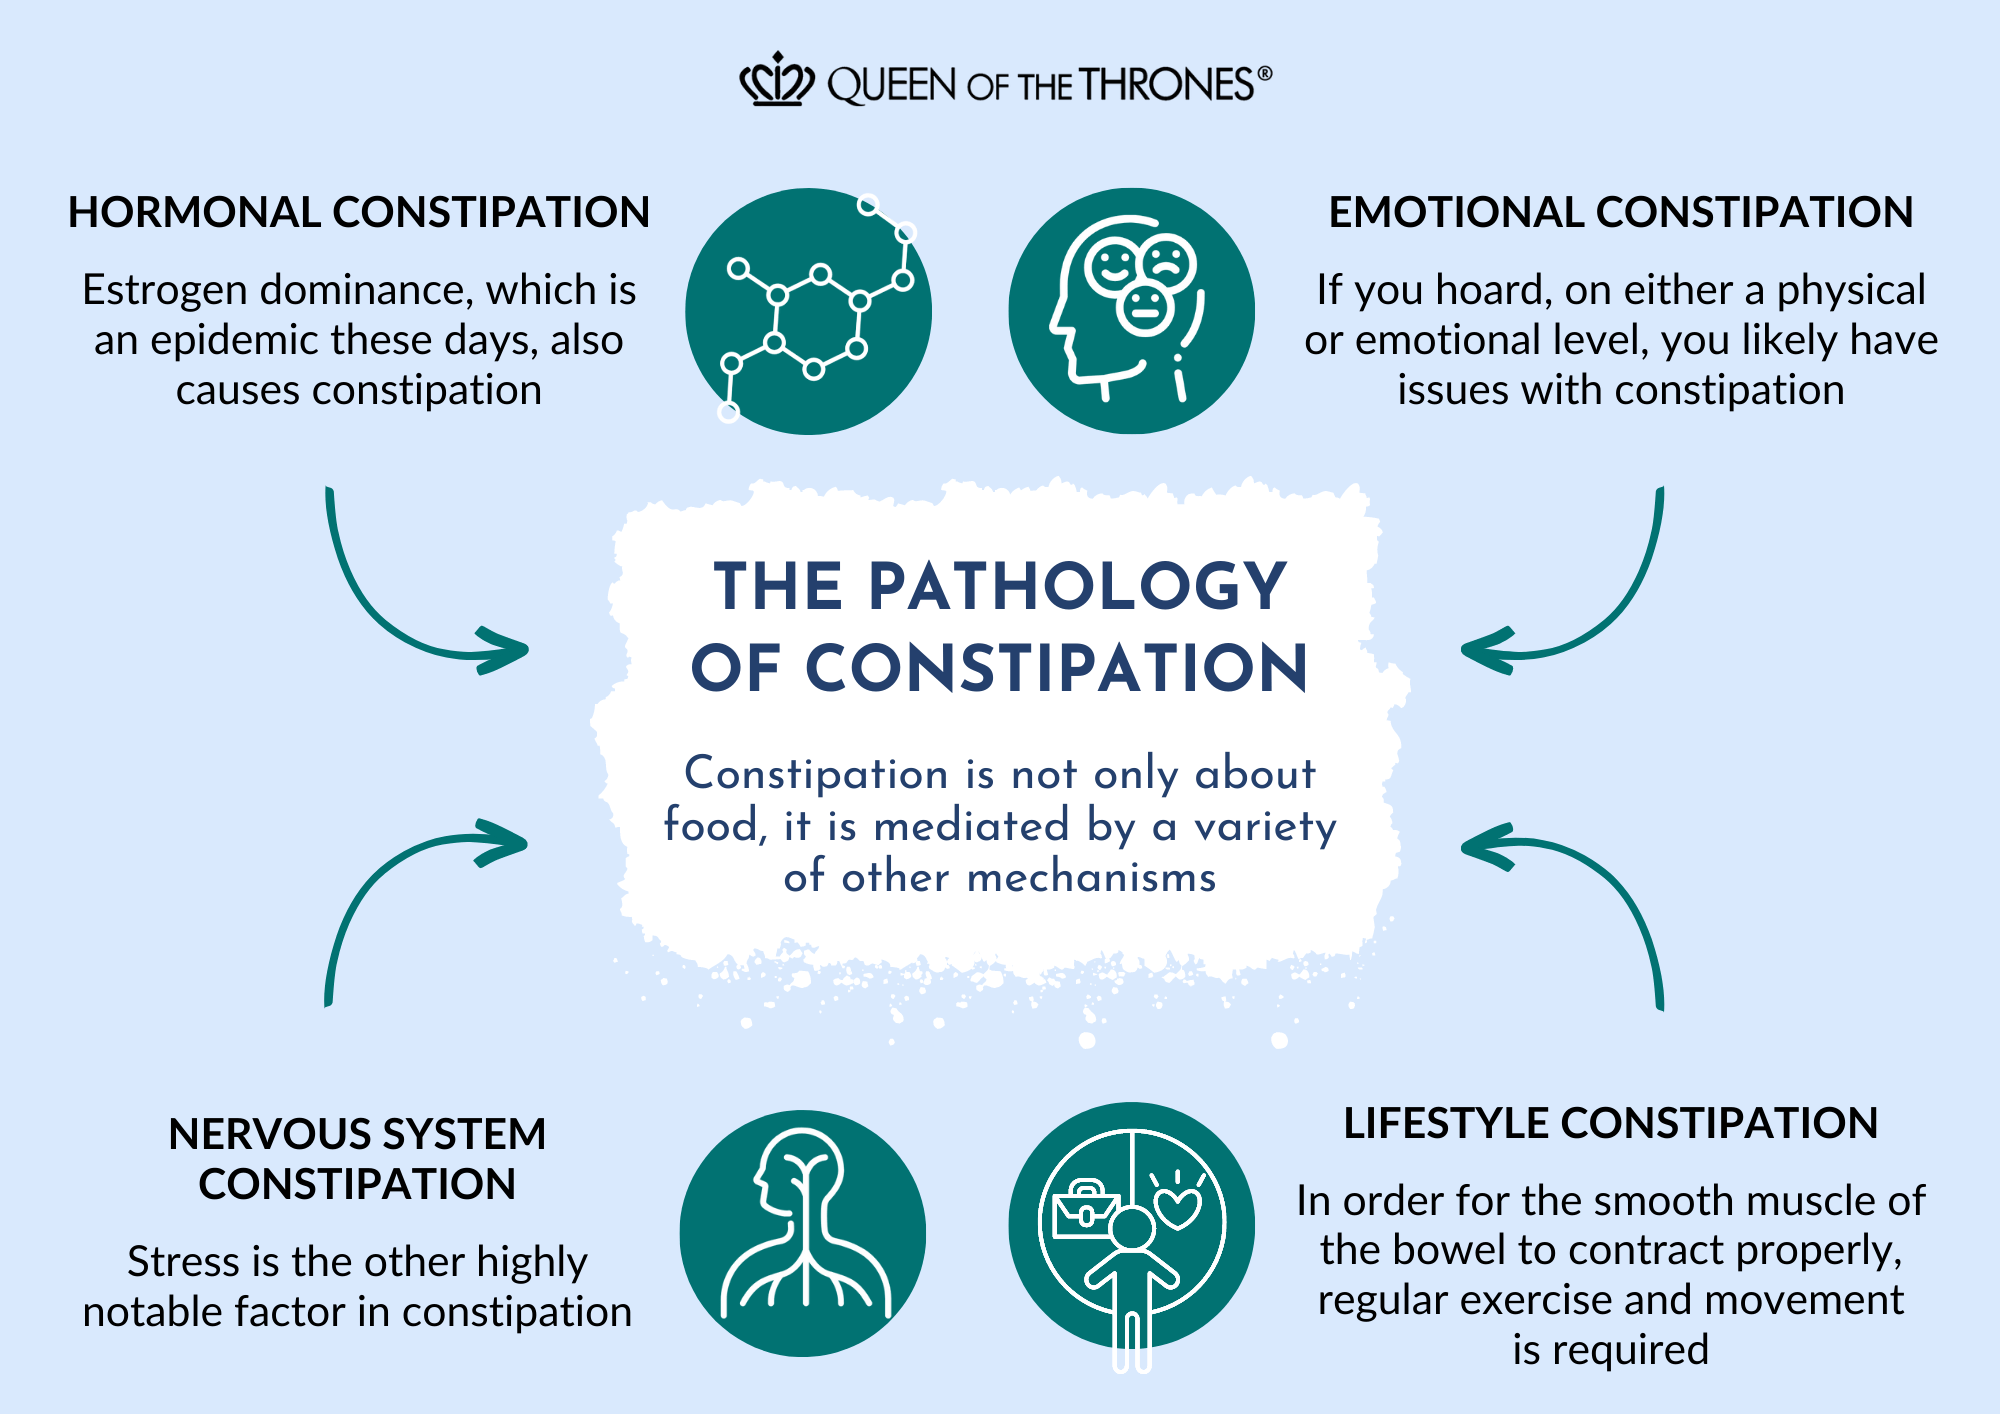 Pathology of constipation by Queen of the Thrones